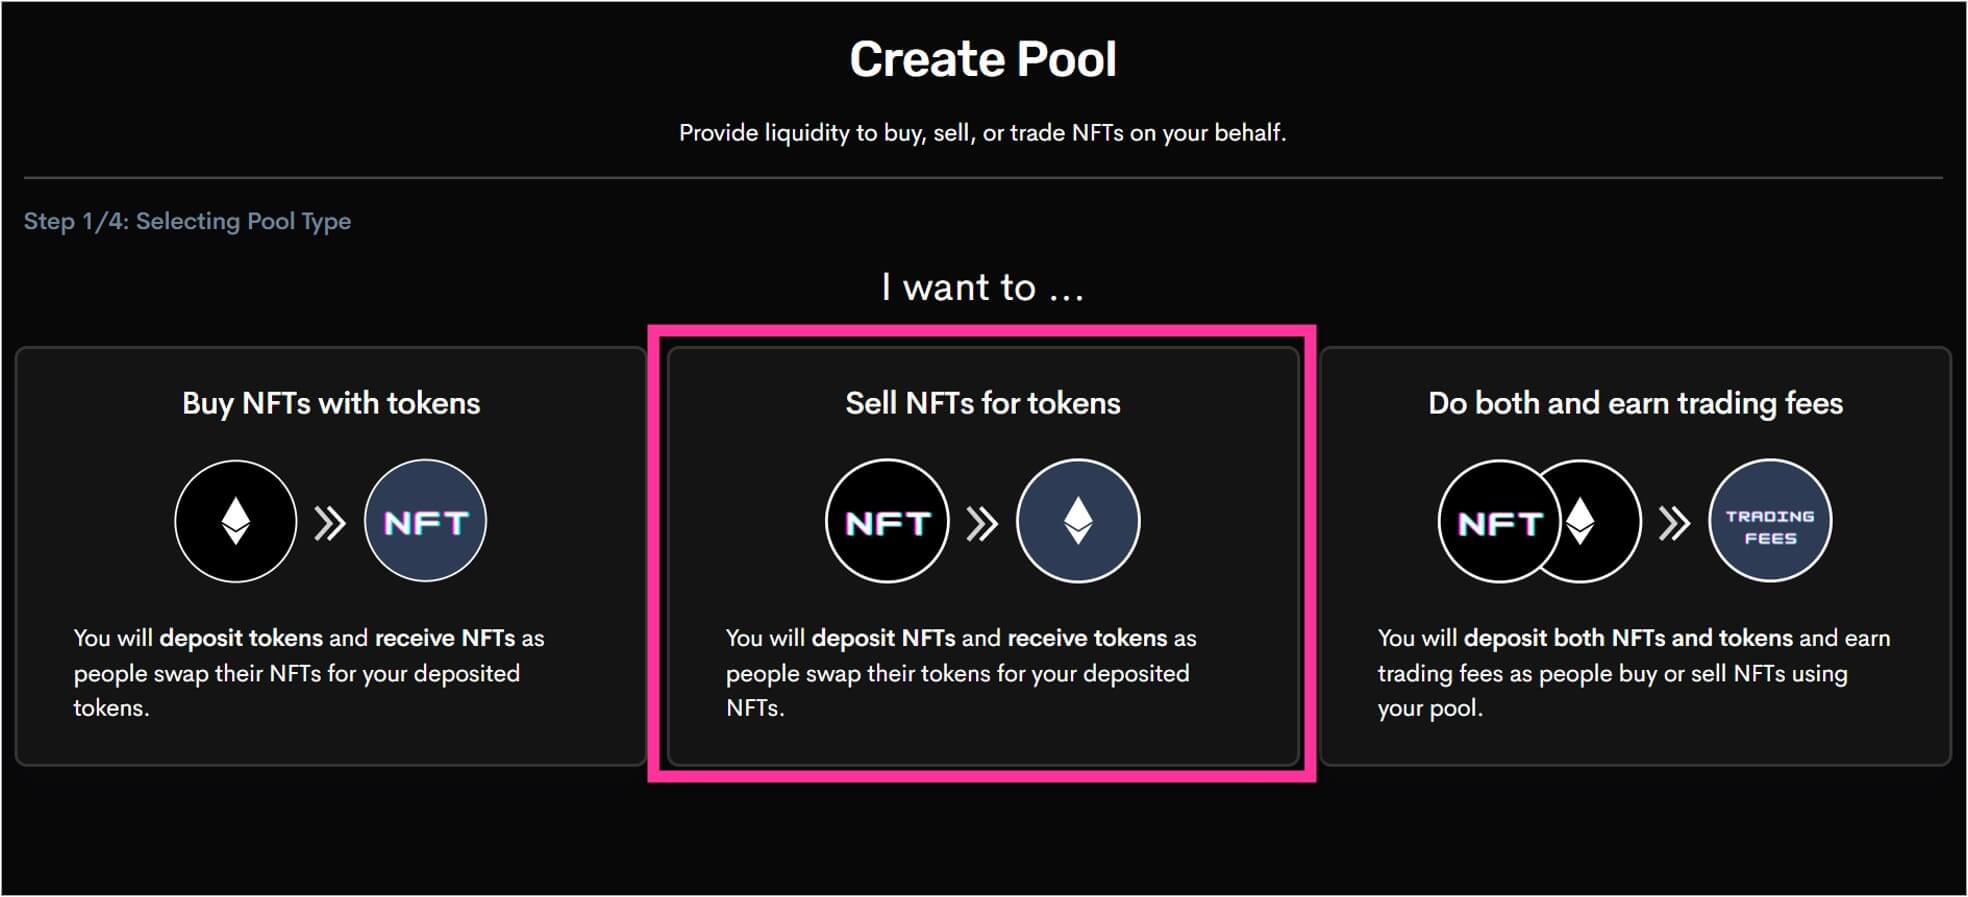 「Sell NFTs for Tokens」を選択